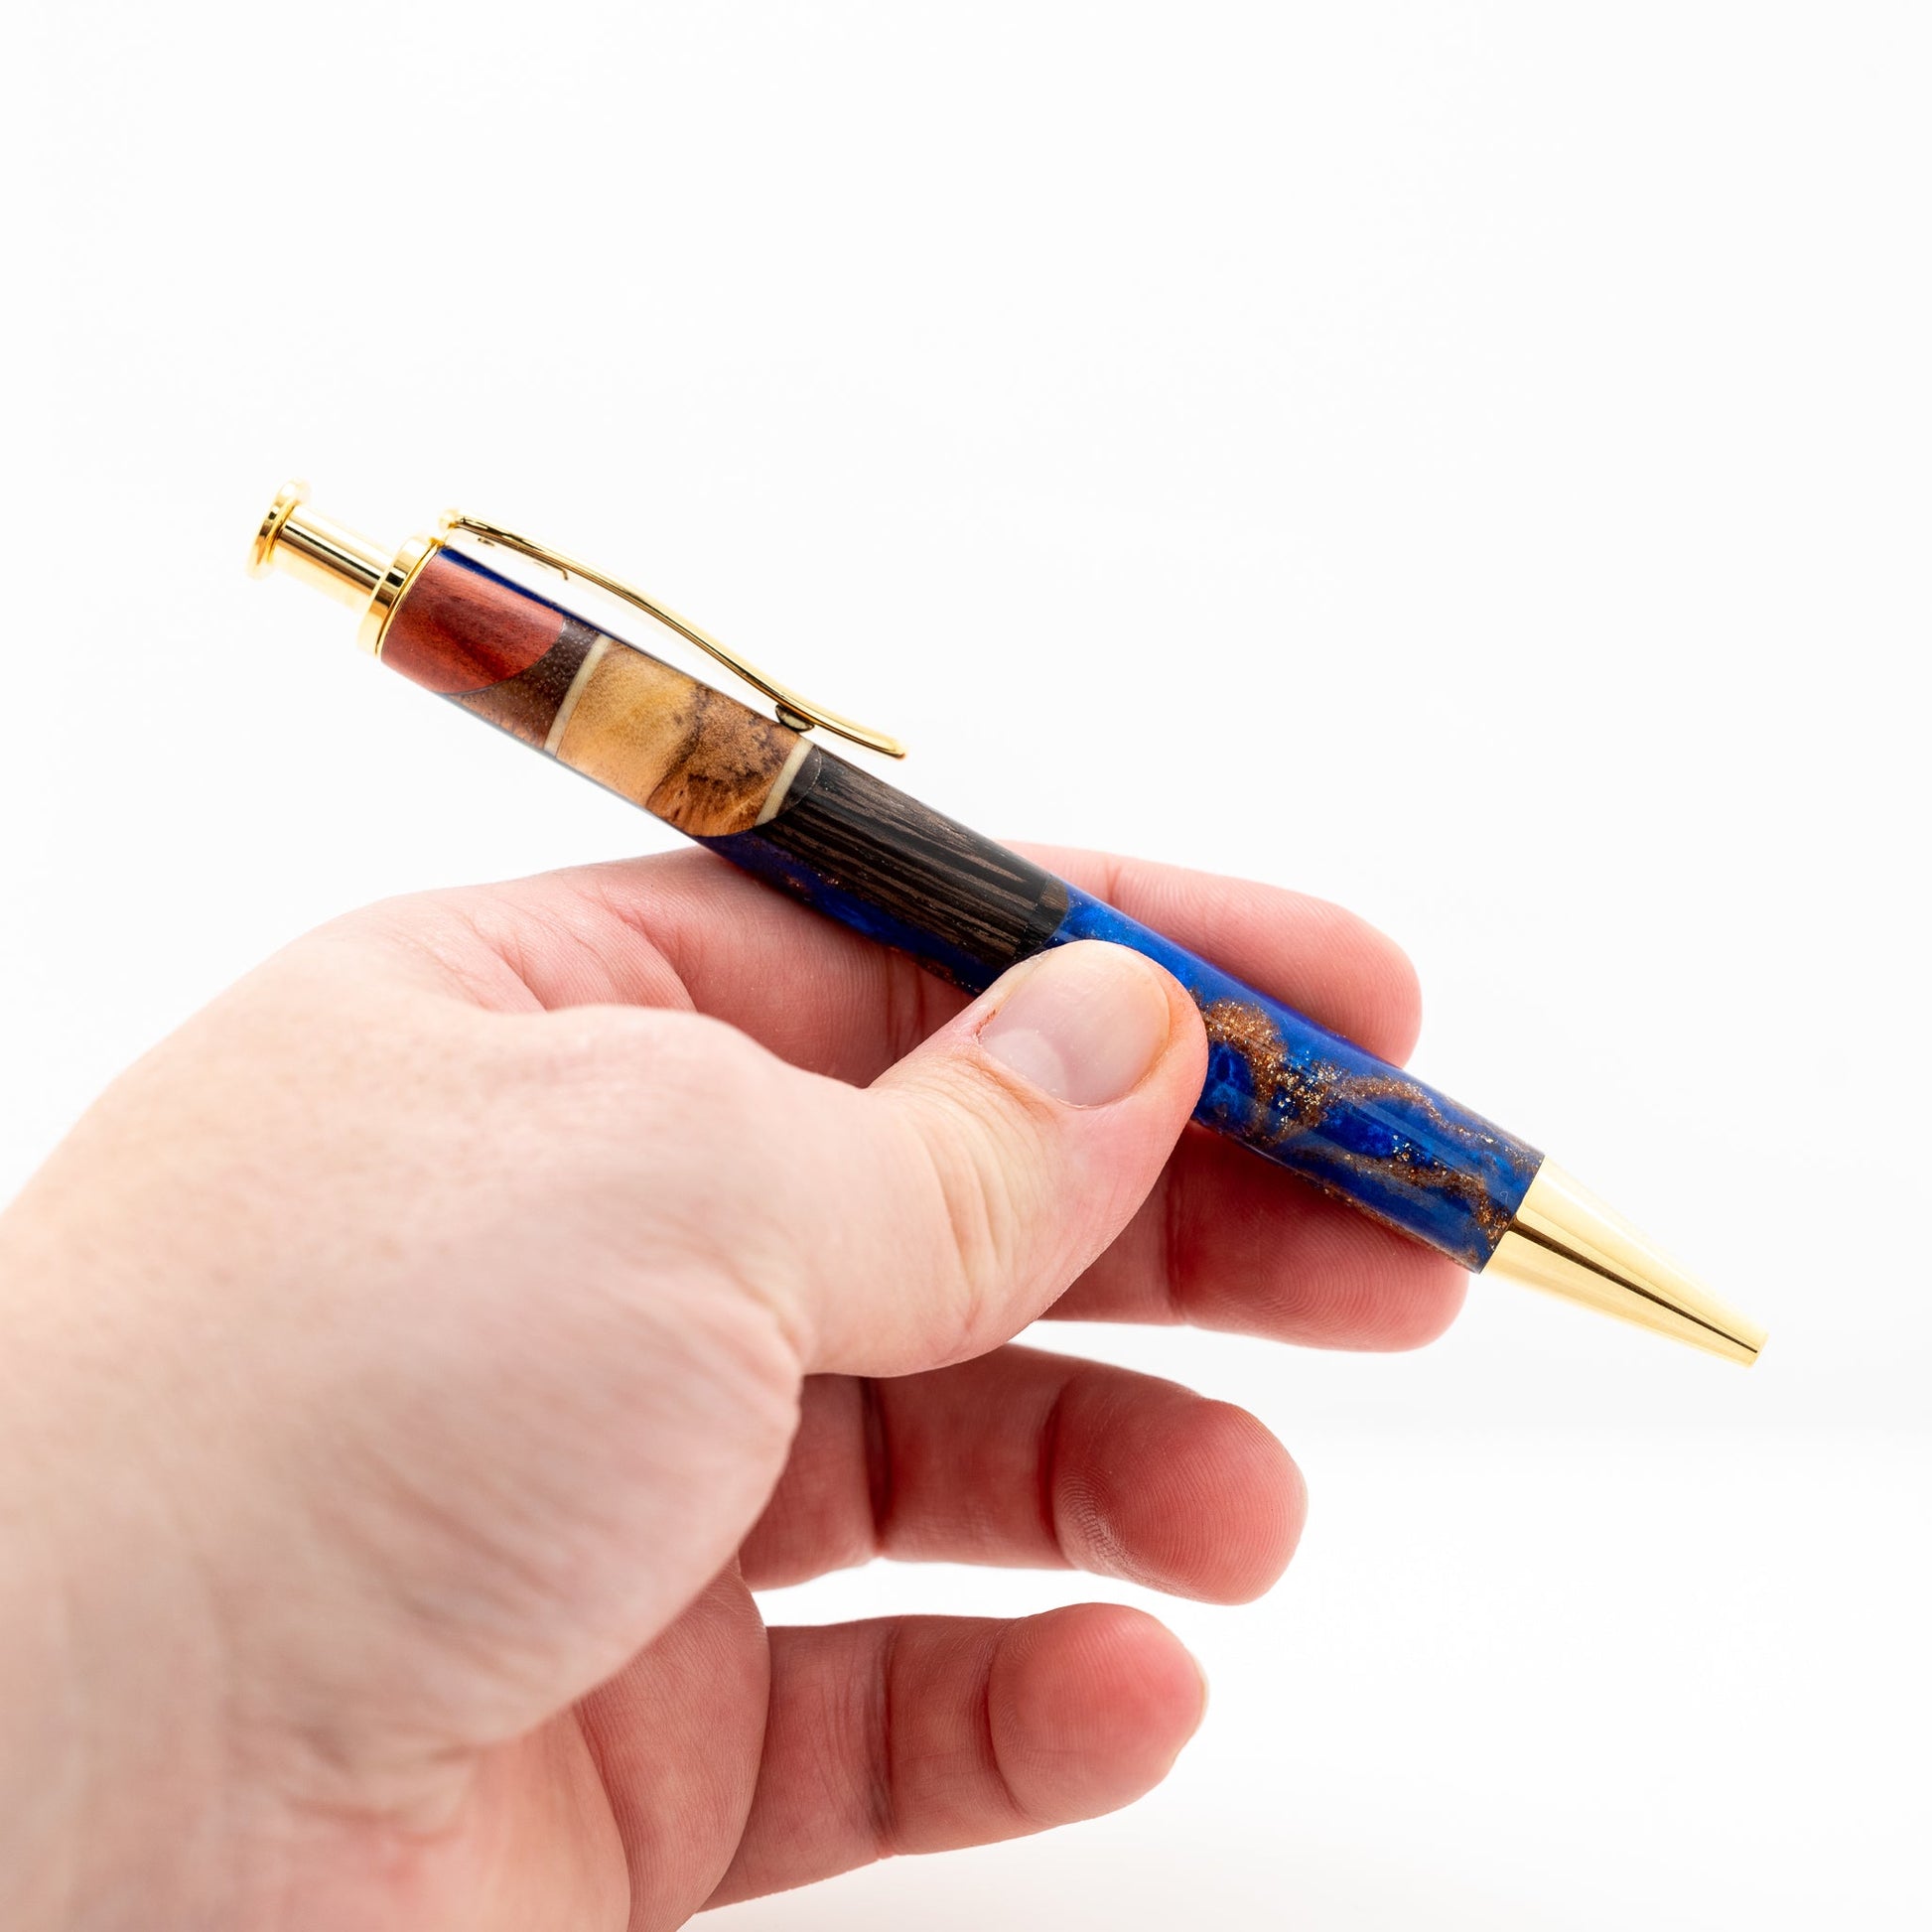 Handmade long click pen with olive wood, wenge, maple and redheart wood suspended in blue sparkle resin with gold plating